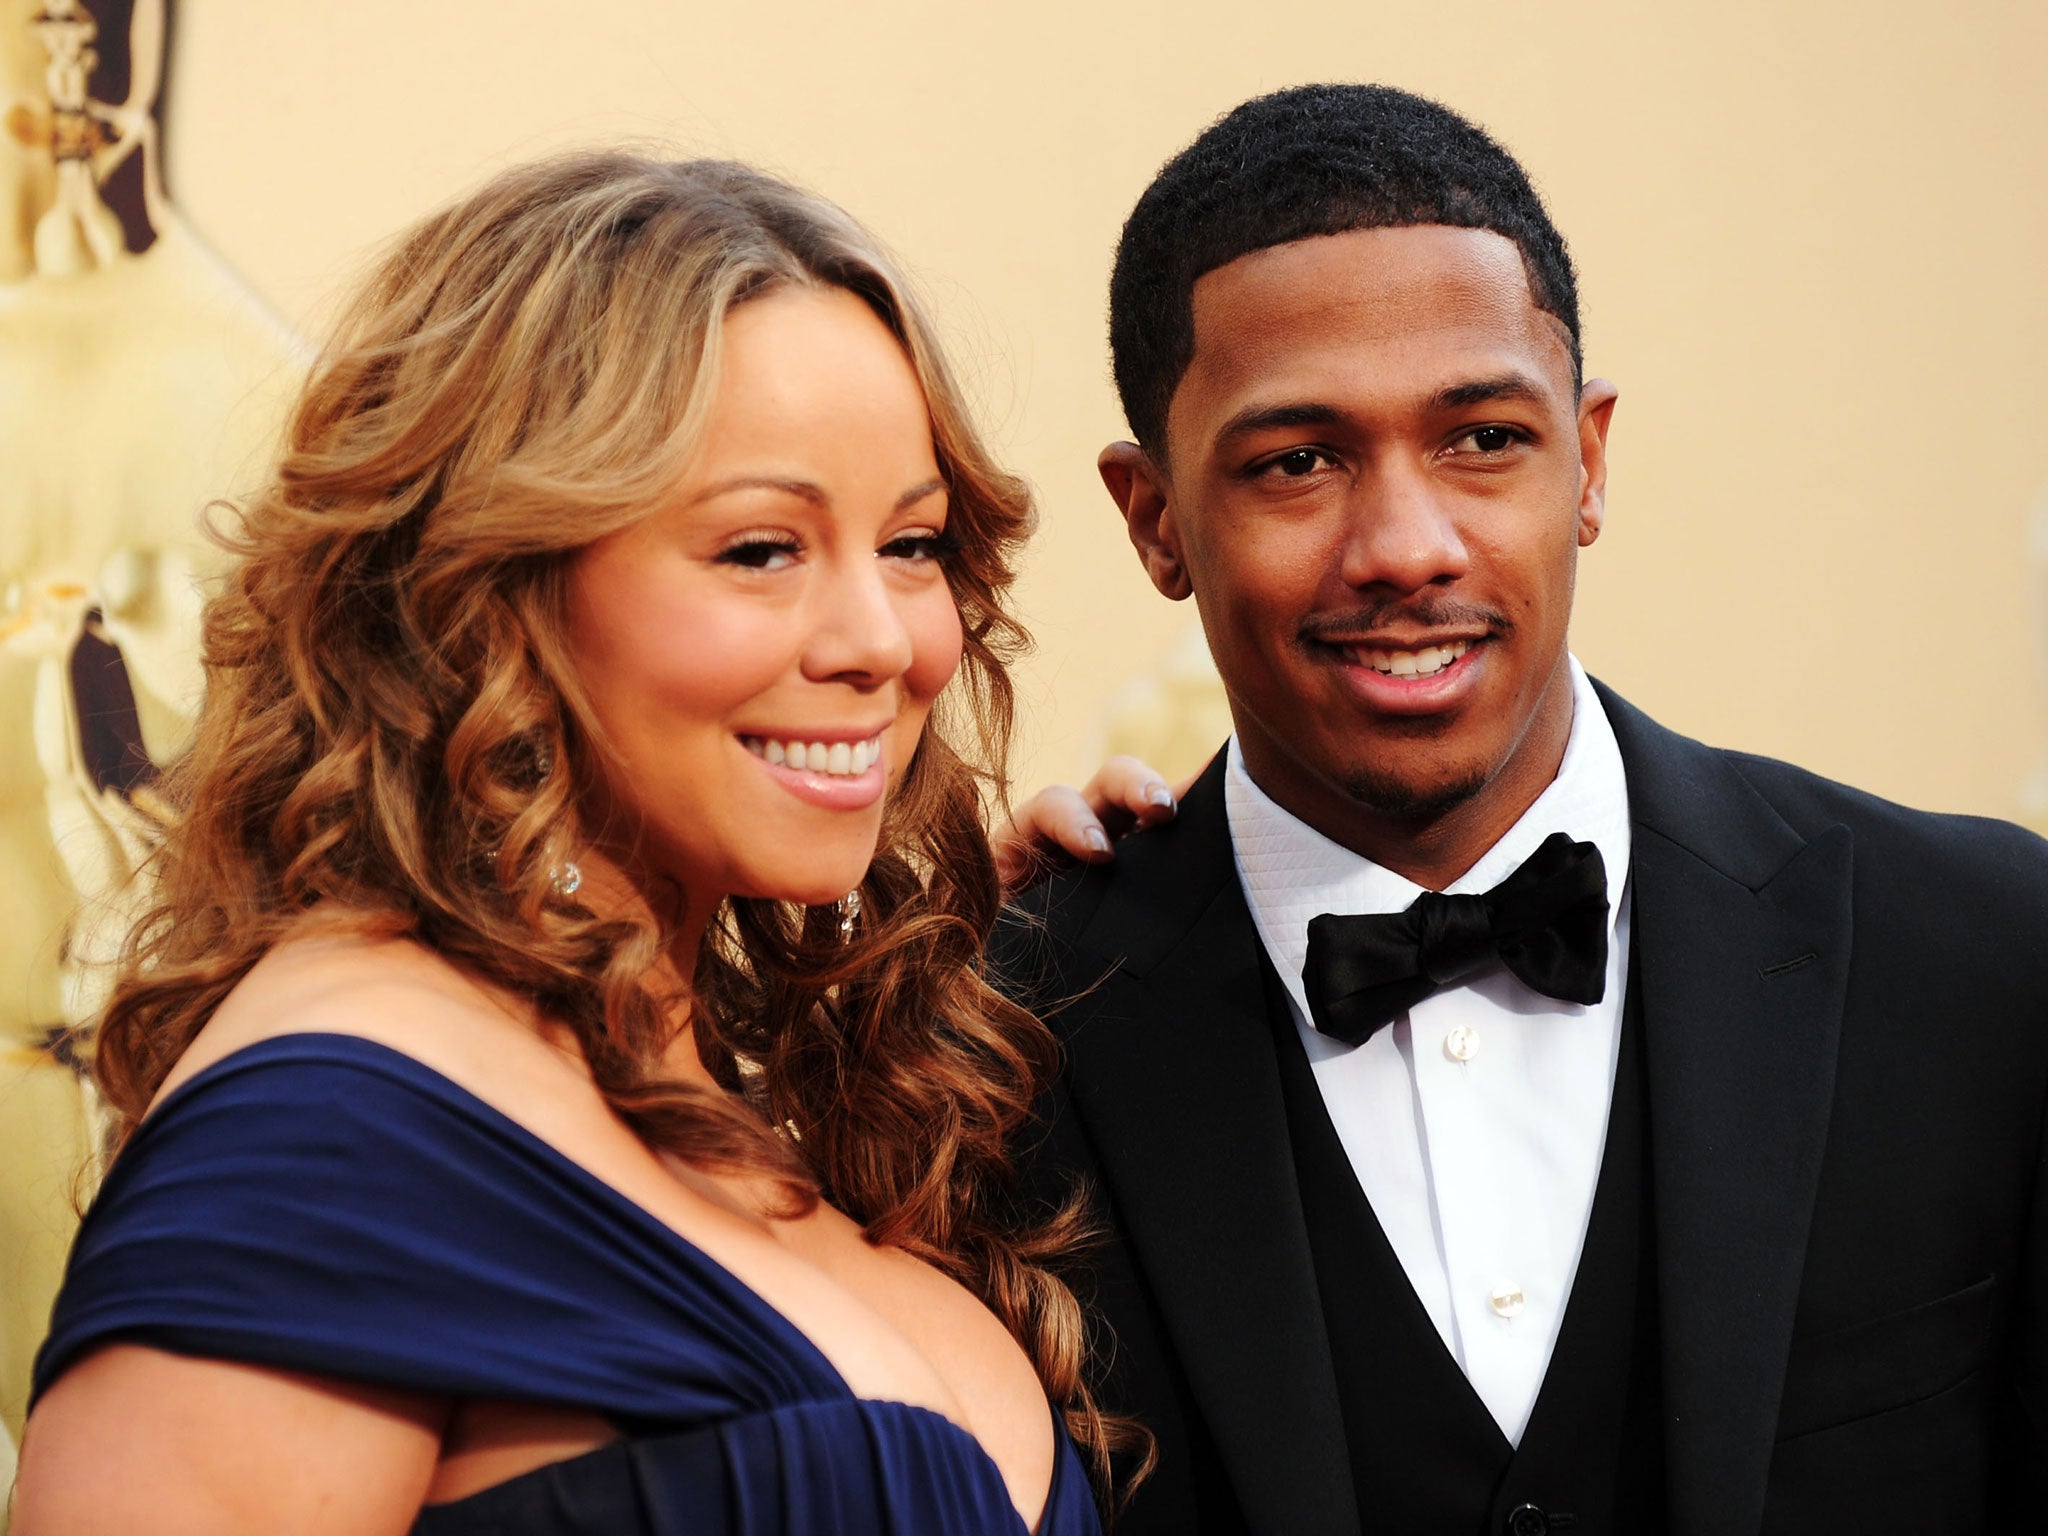 Mariah Carey and her ex-husband Nick Cannon